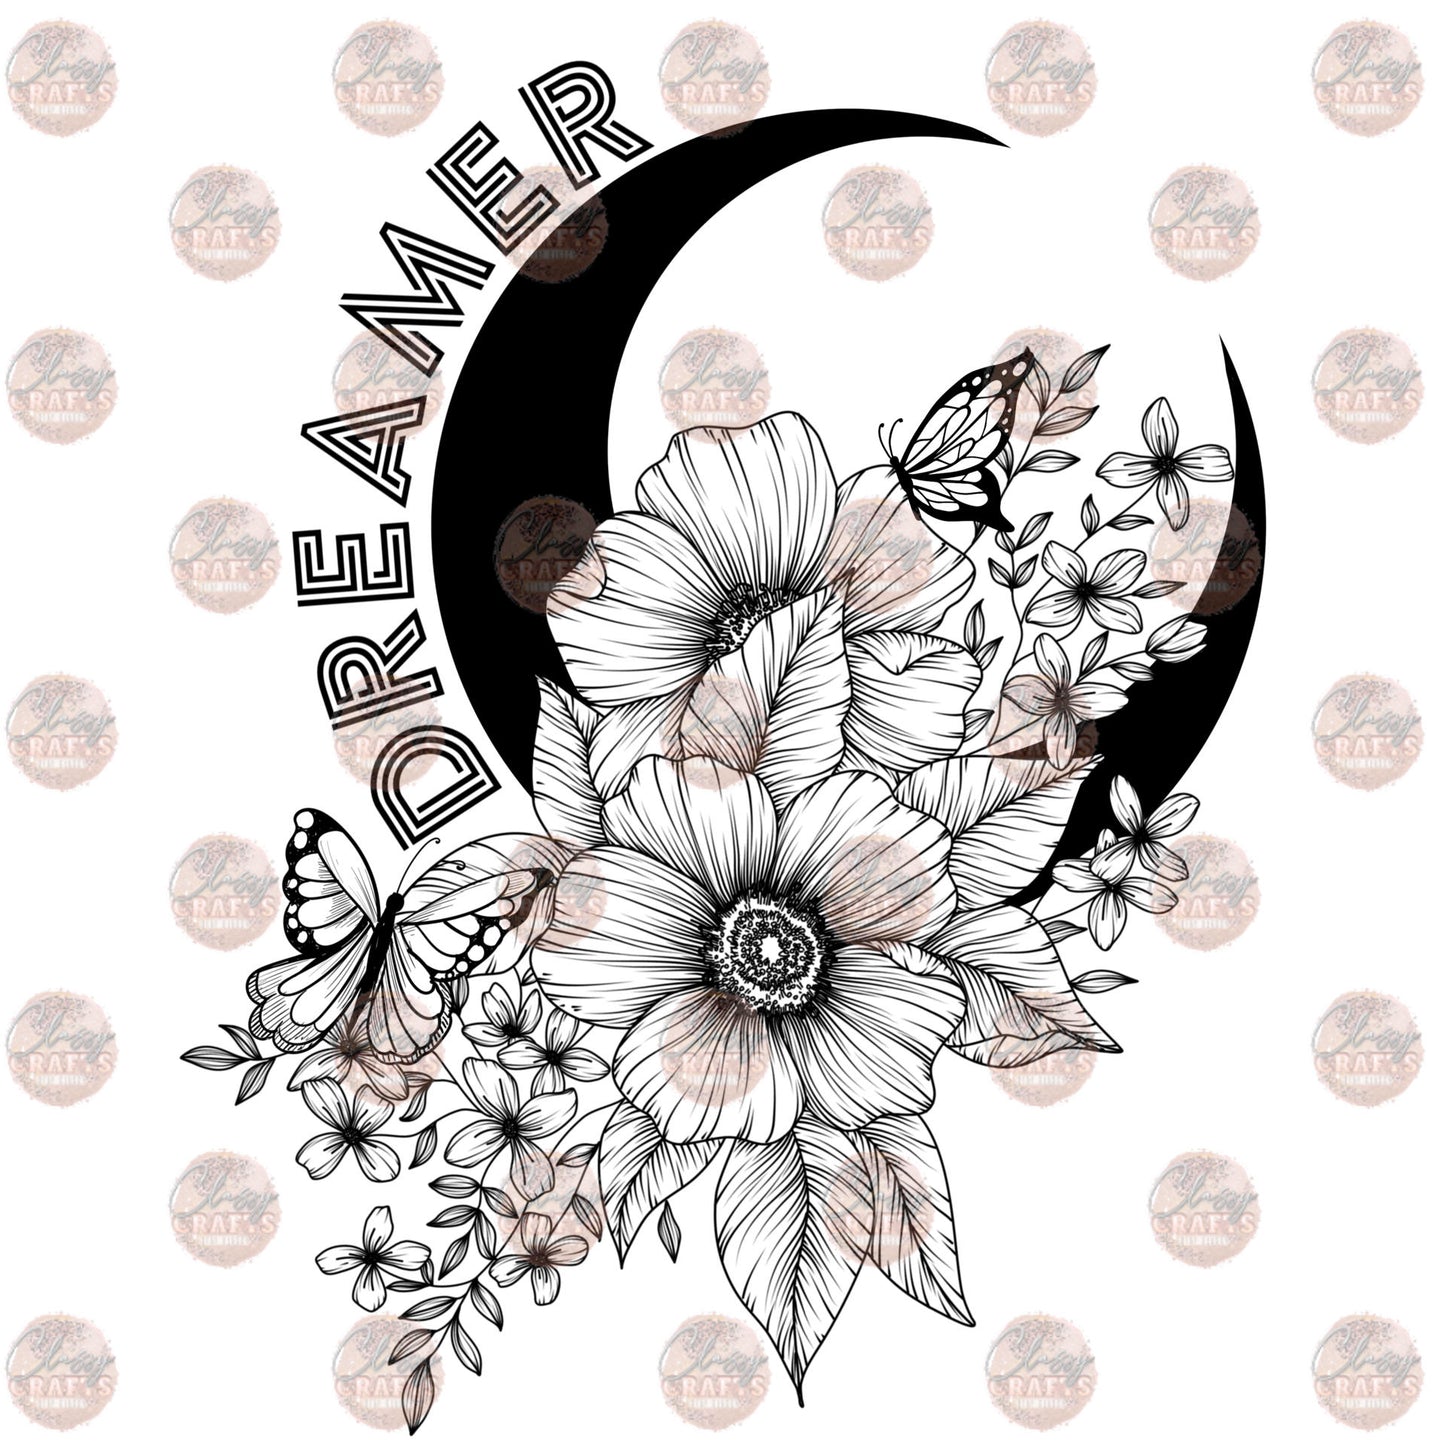 Dreamer Moon and Flowers - Sublimation Transfer